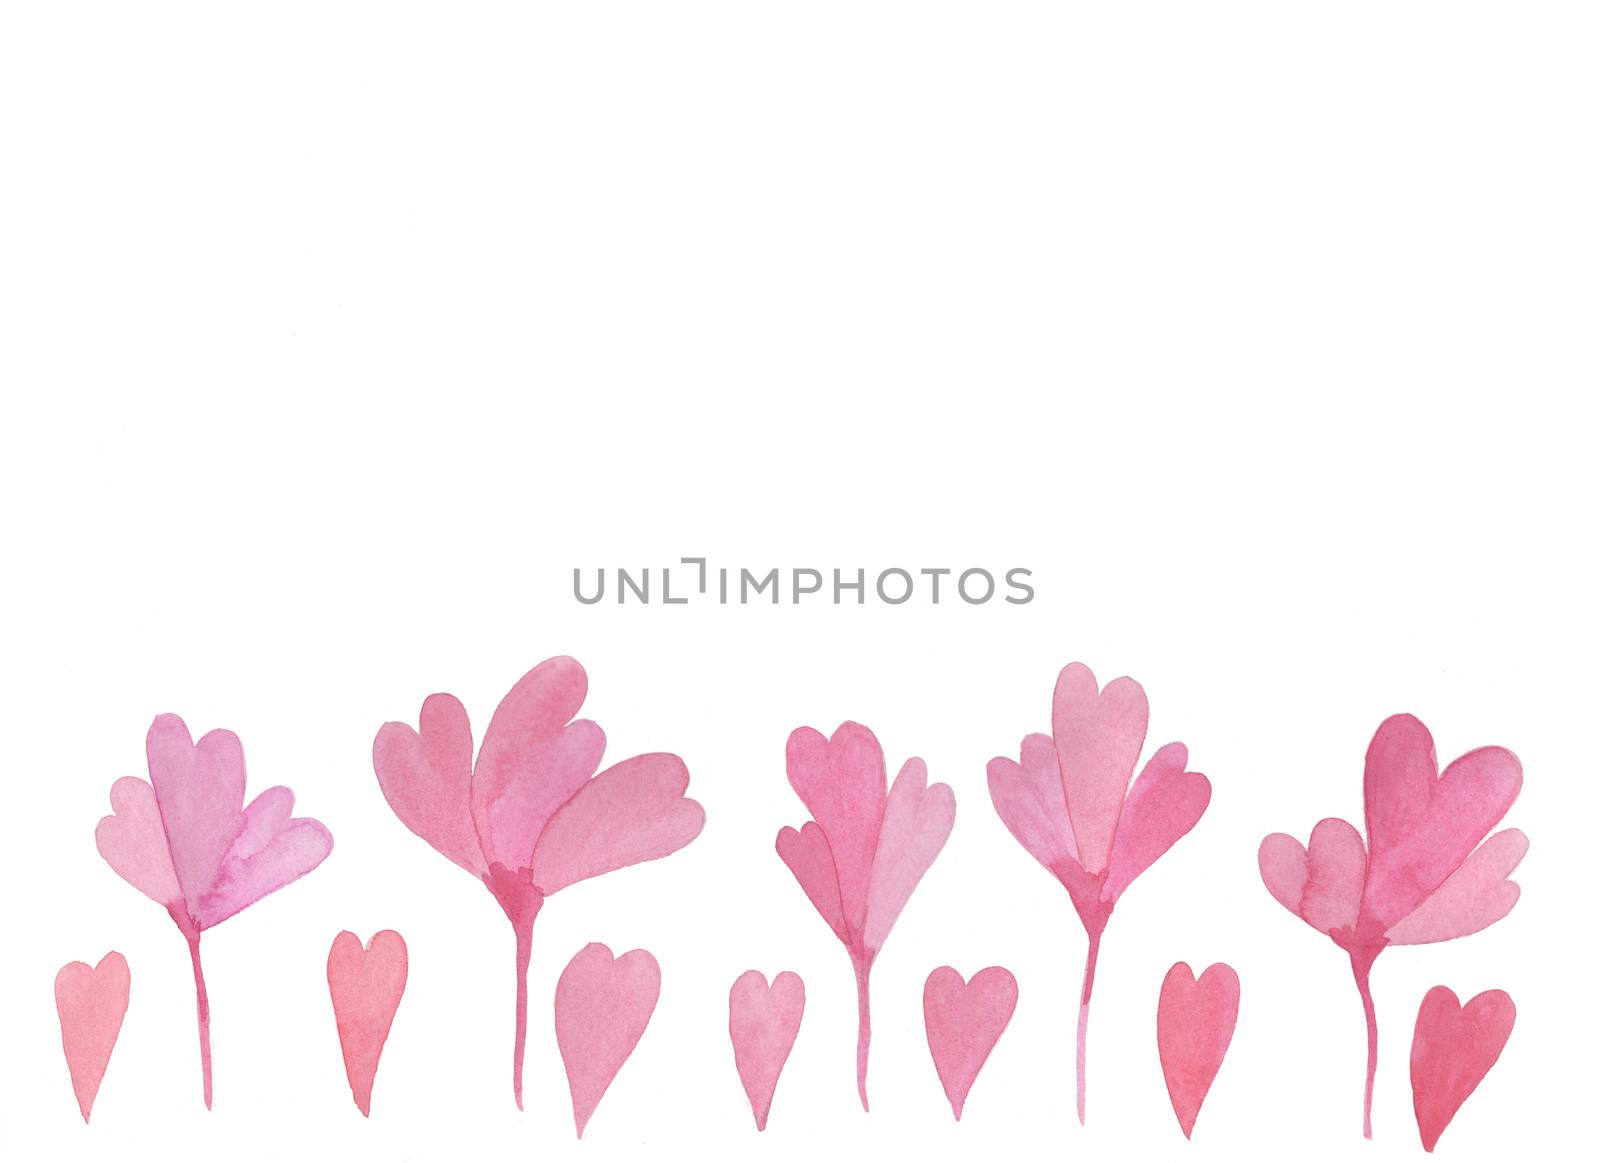 Hand-drawn watercolor flowers and hearts isolated on white background. Wedding or Valentine's template.